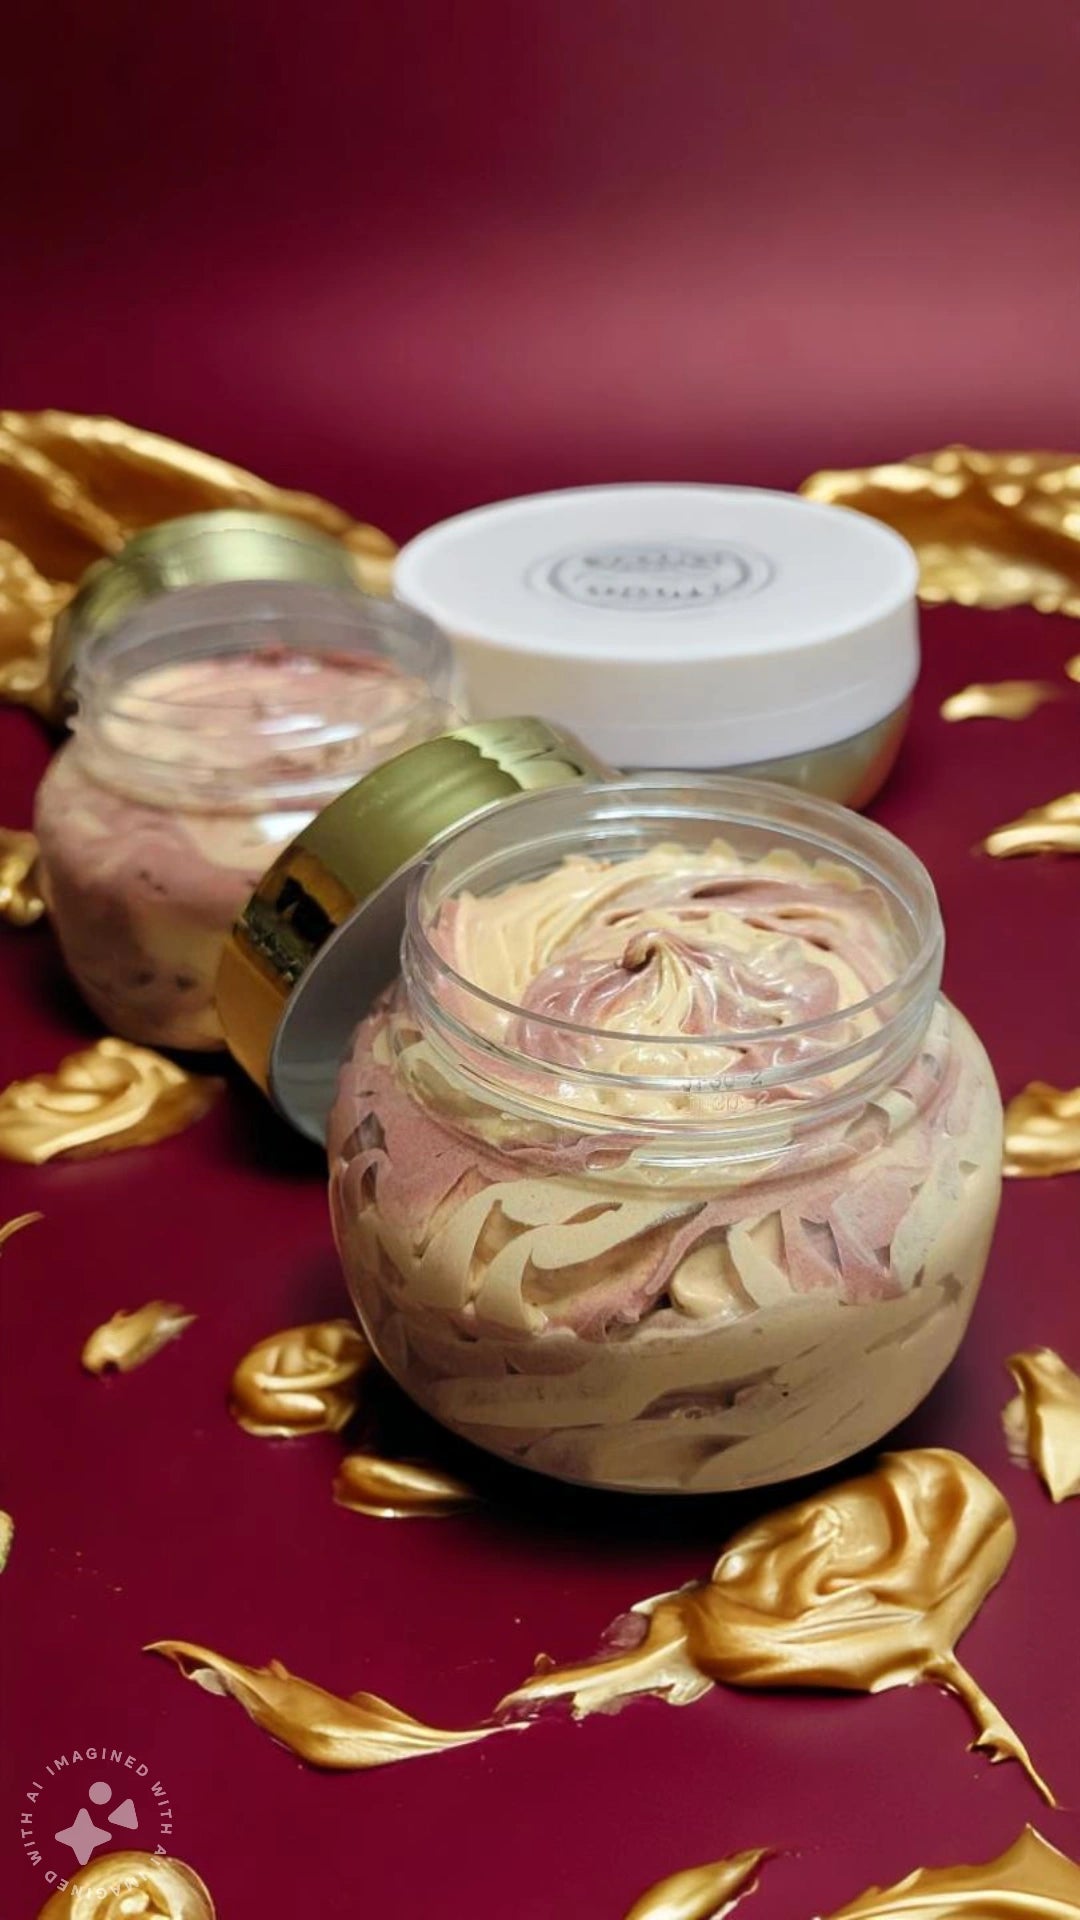 Rouge Whipped Body Butter! Inspired by Baccarat 540✨✨✨ Without Shimmer! (Unisex)